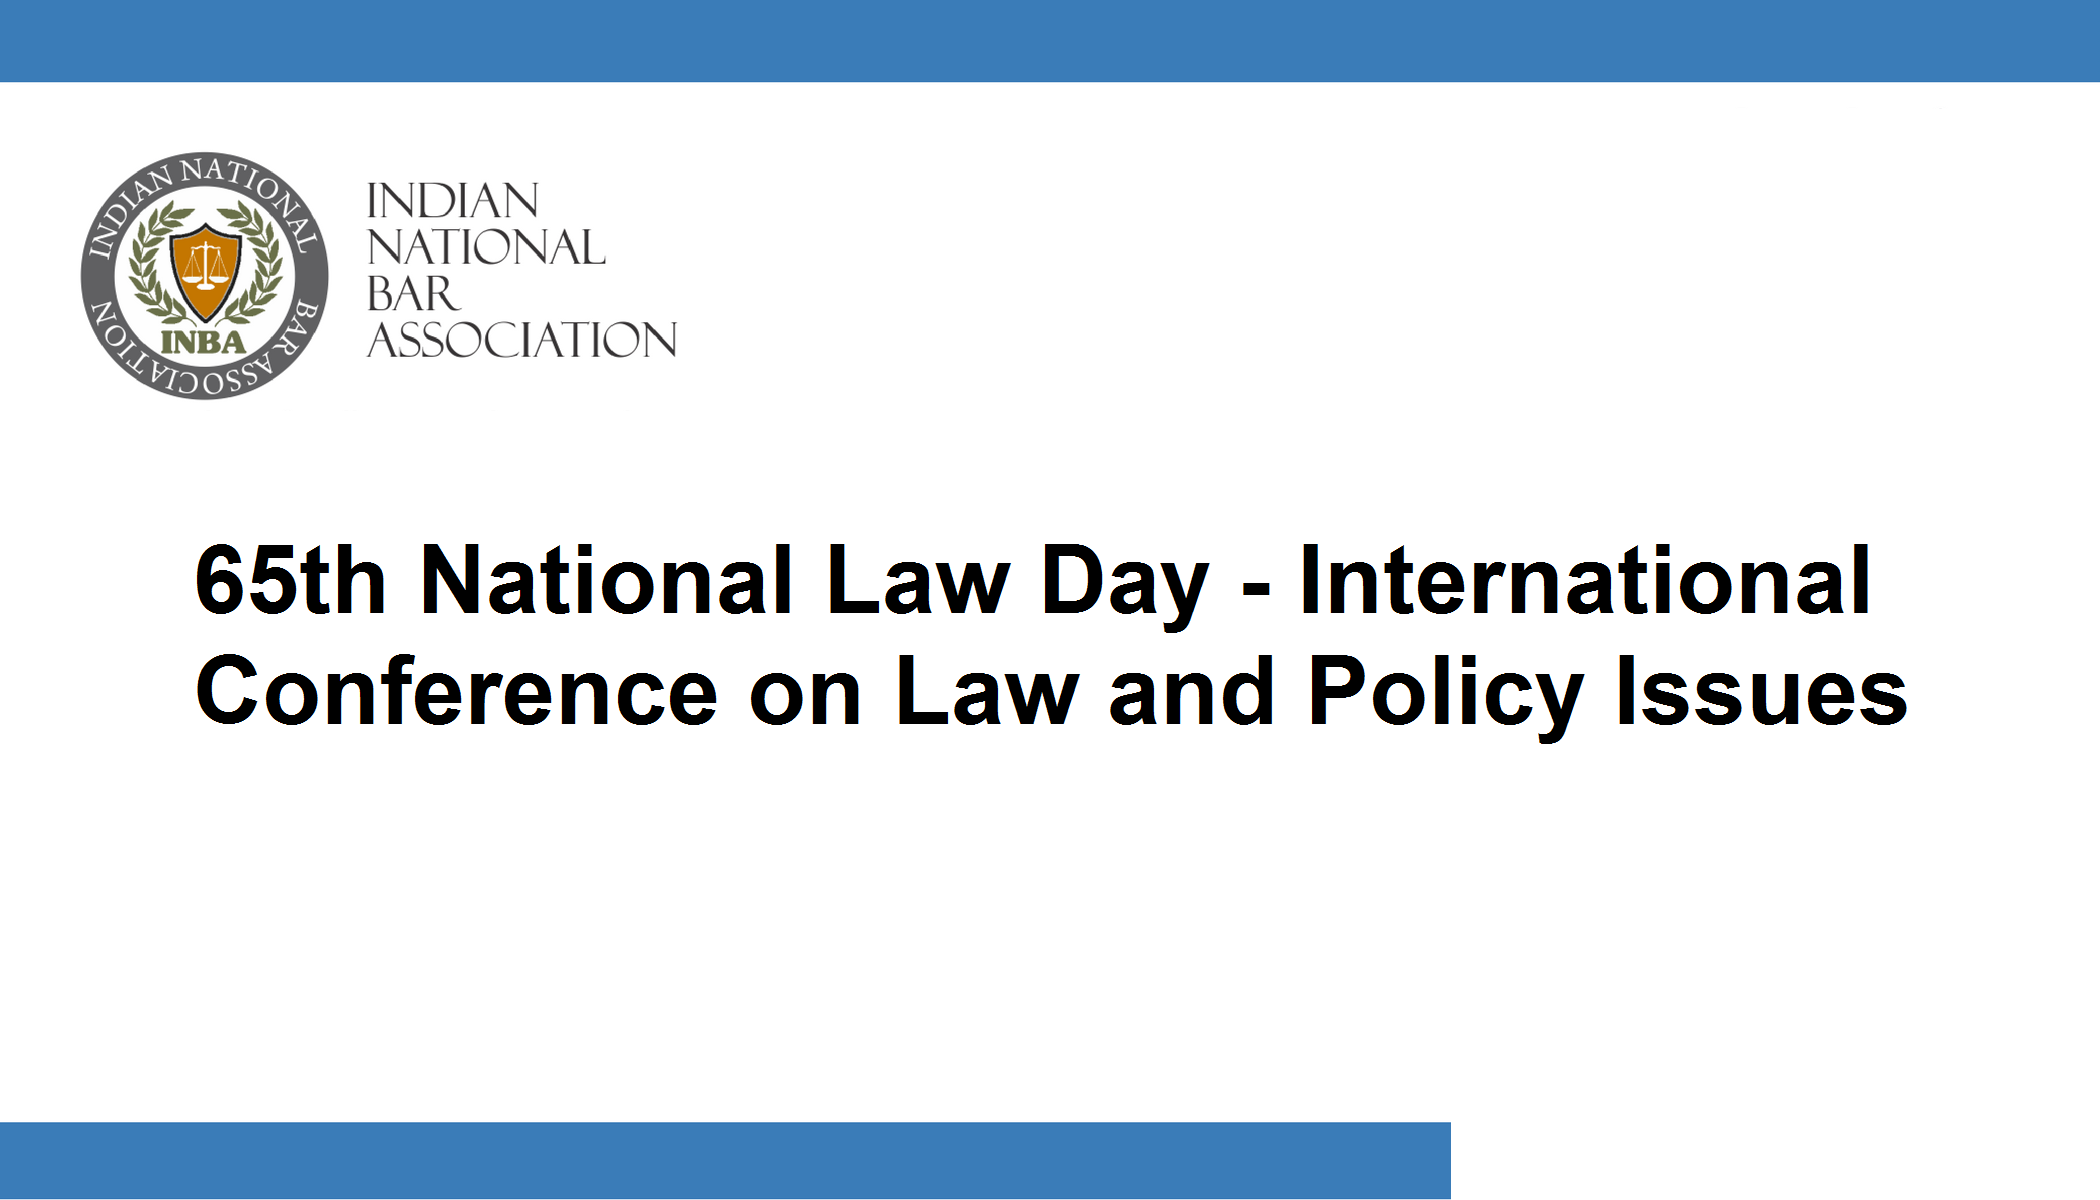 65th National Law Day - International Conference on Law and Policy Issues